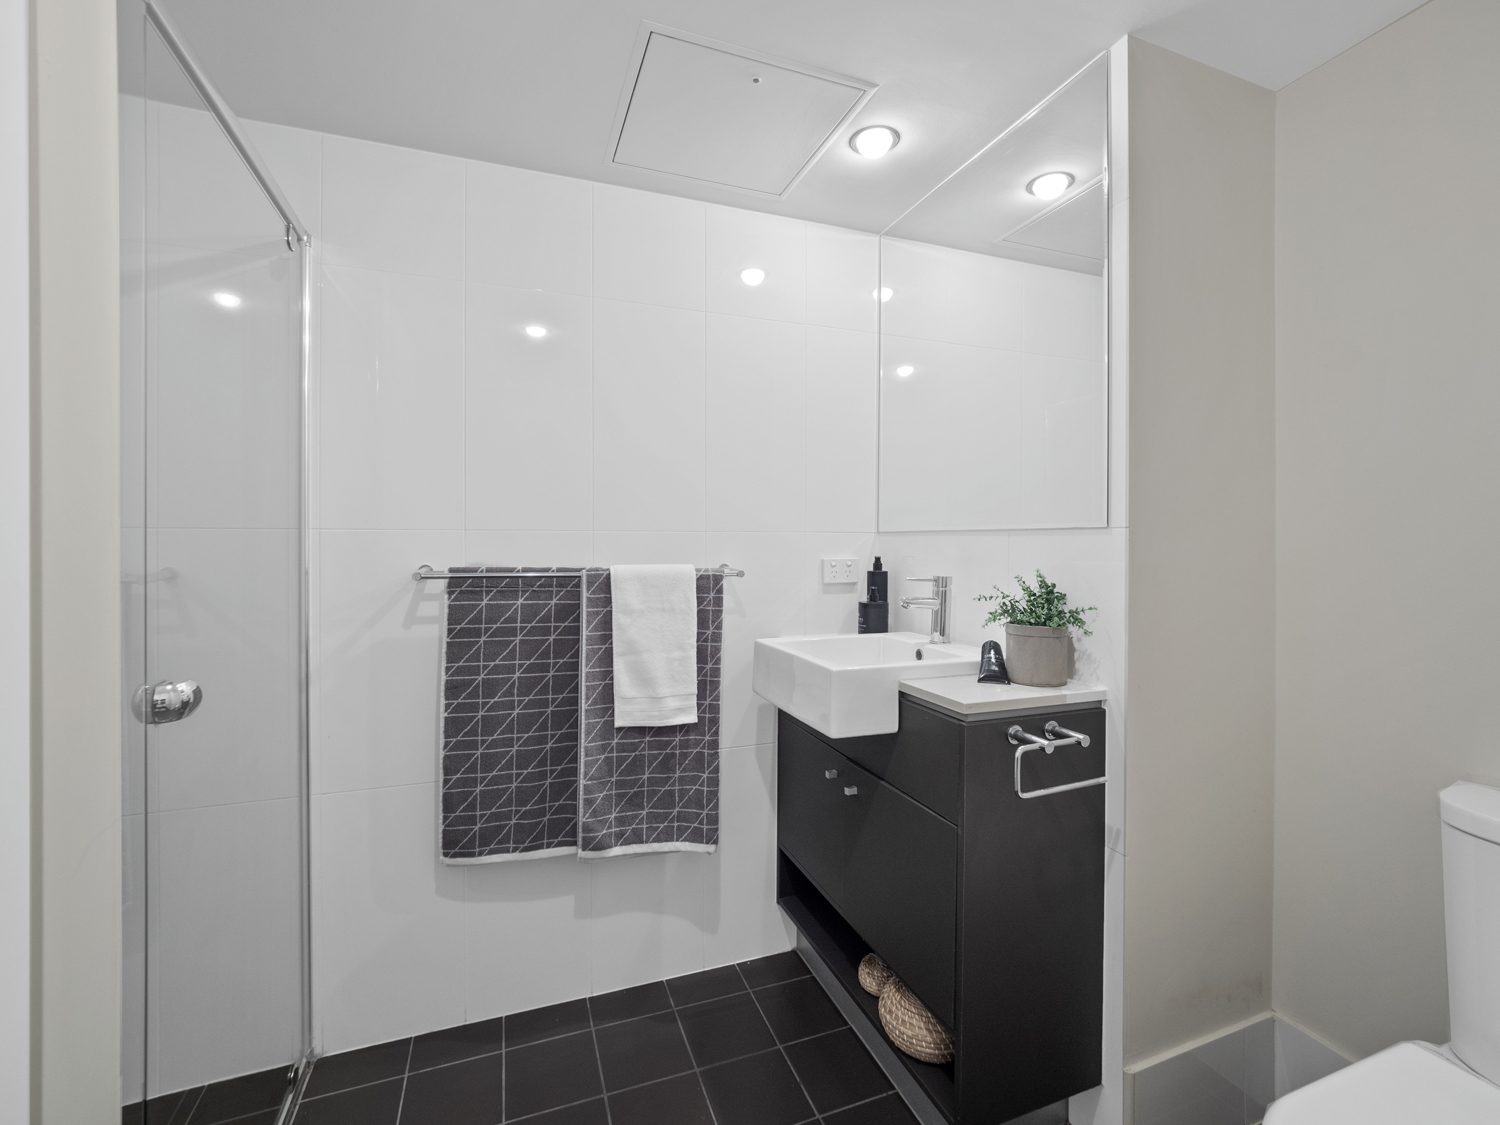 The bathroom - Photographing an apartment for sale at 92 Quay St South Brisbane